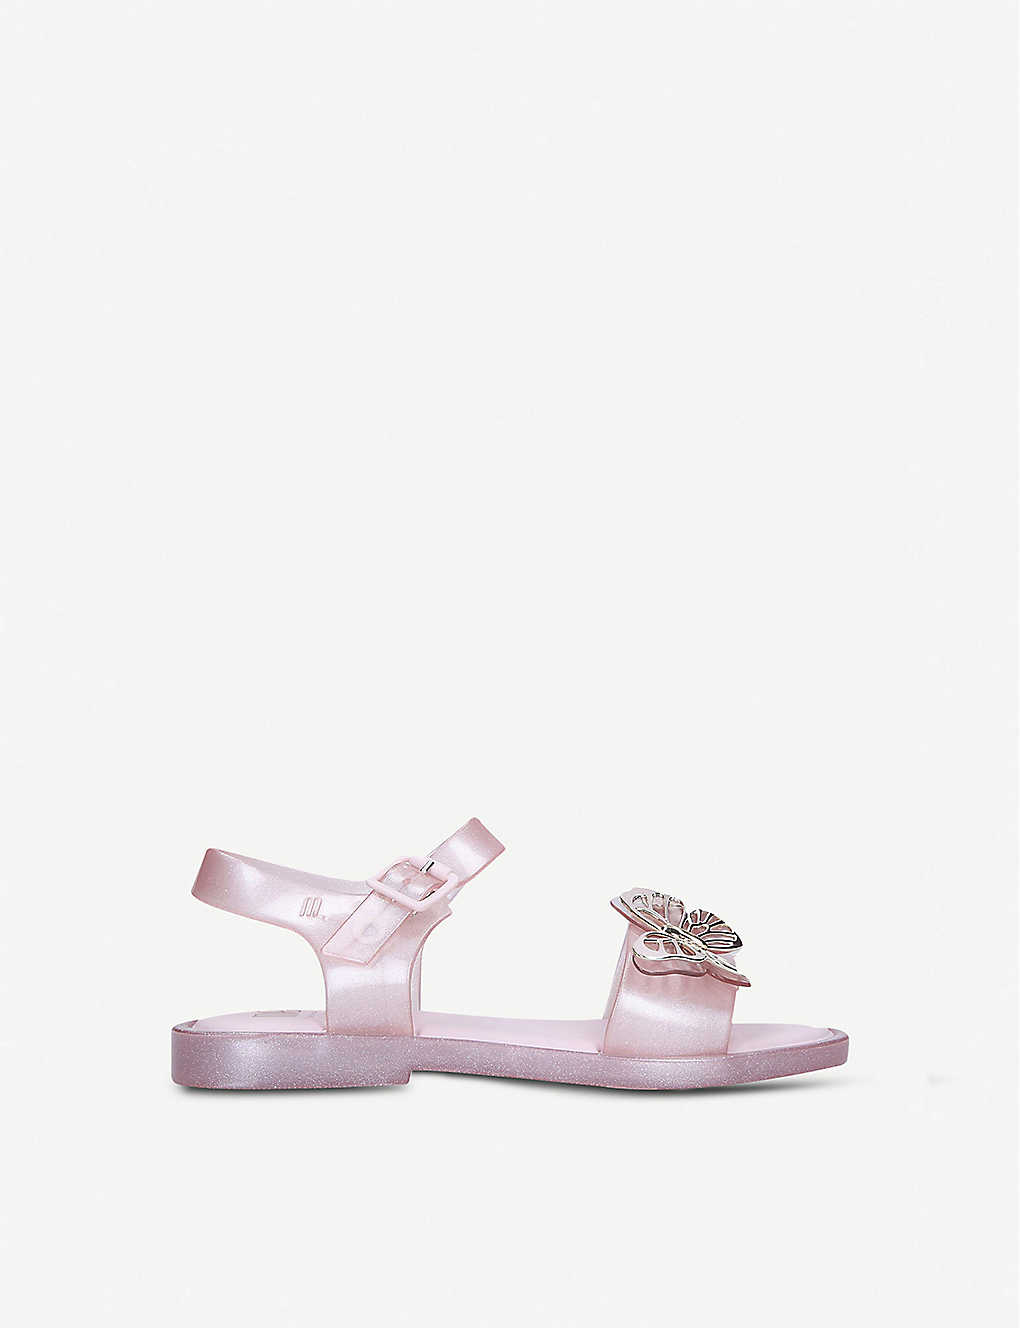 MINI MELISSA MAR FLY RUBBER SANDALS 7-9 YEARS